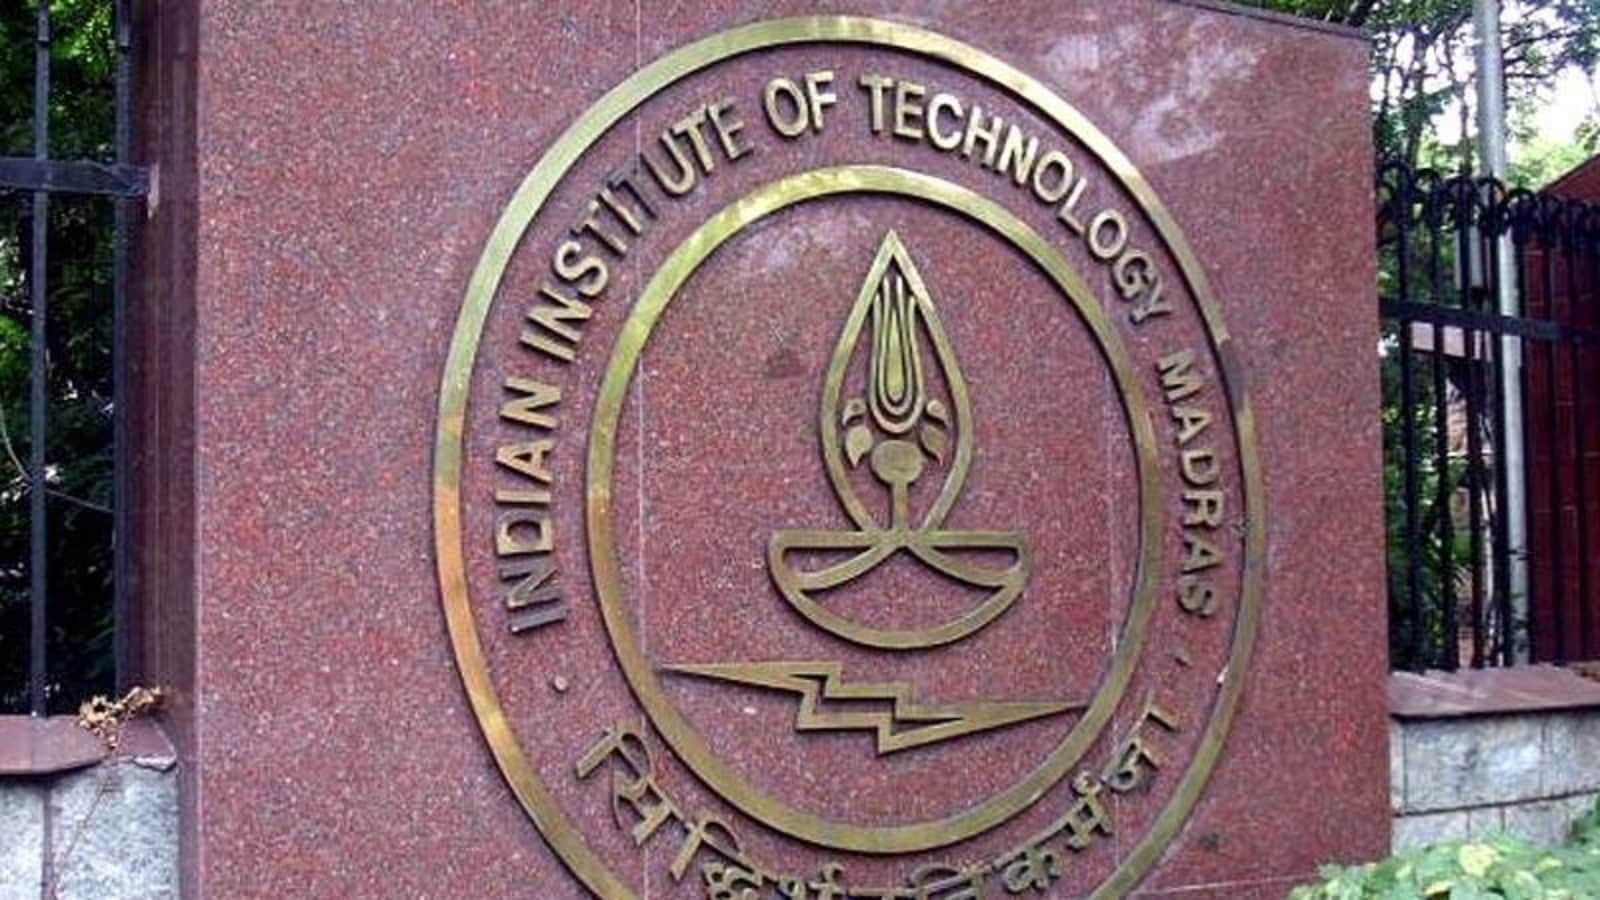 IIT Madras to conduct ‘Sports Tech Start Up Conclave’ on July 12-13 in New Delhi, details inside